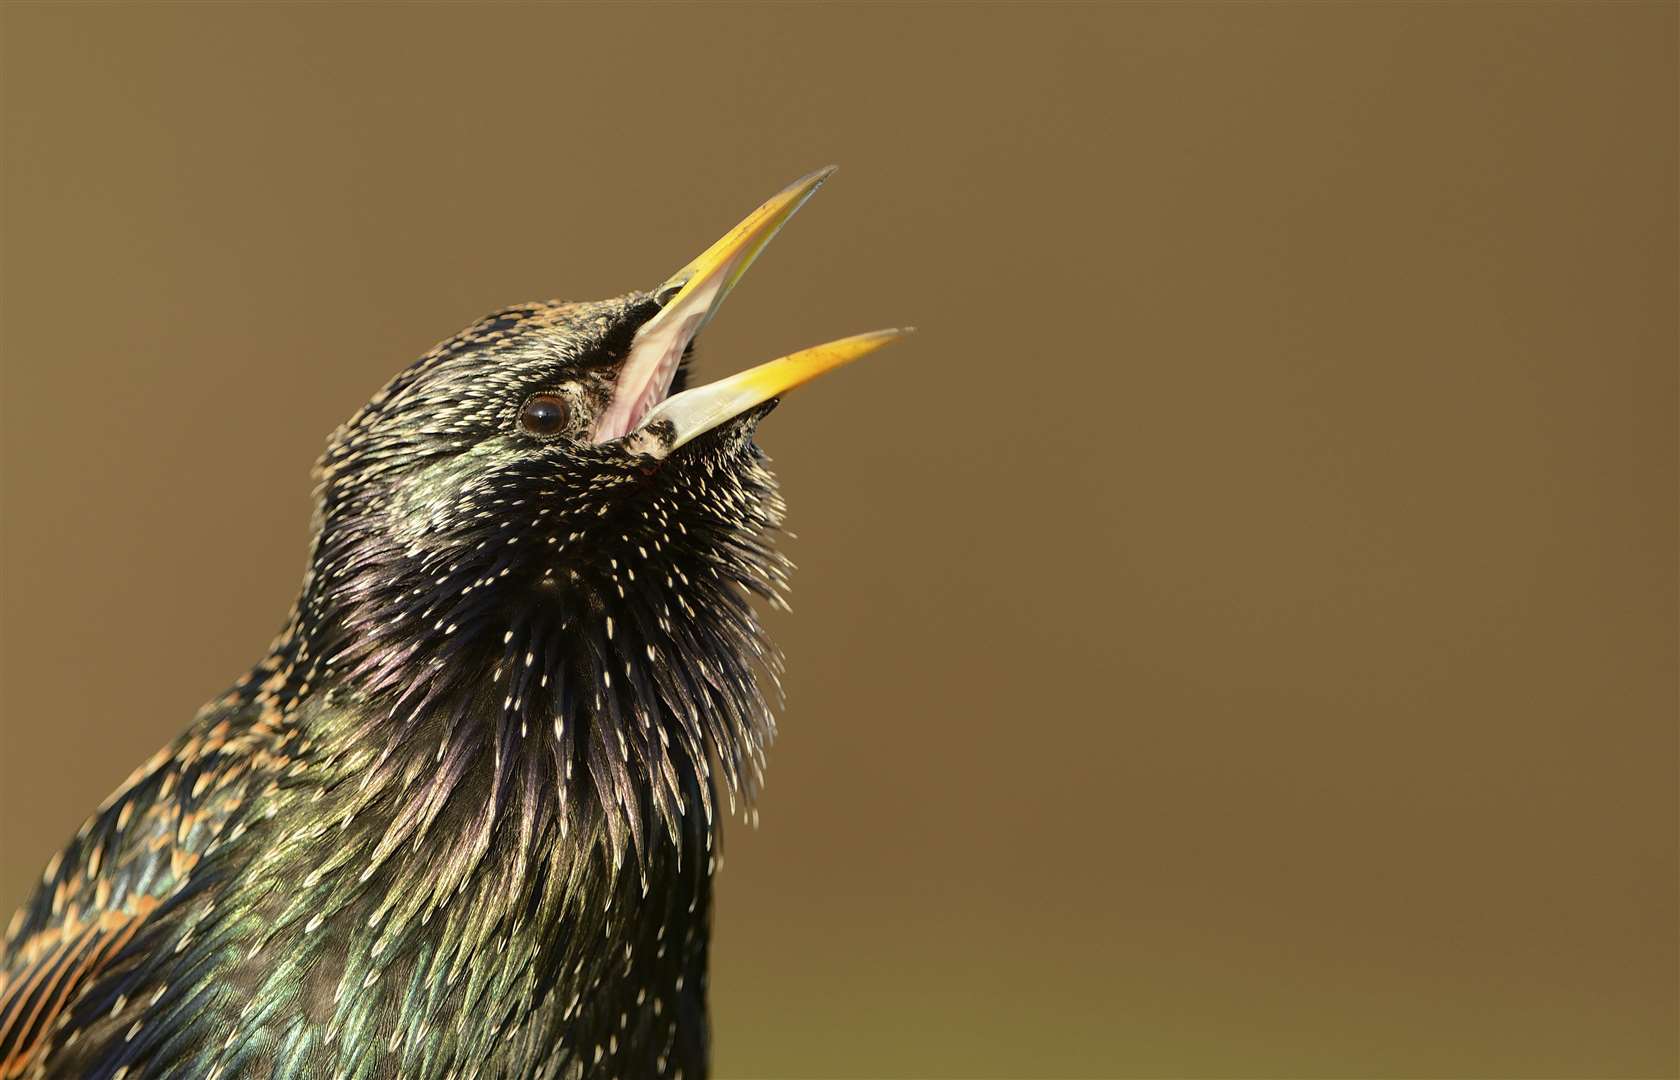 You're likely to spot some starlings